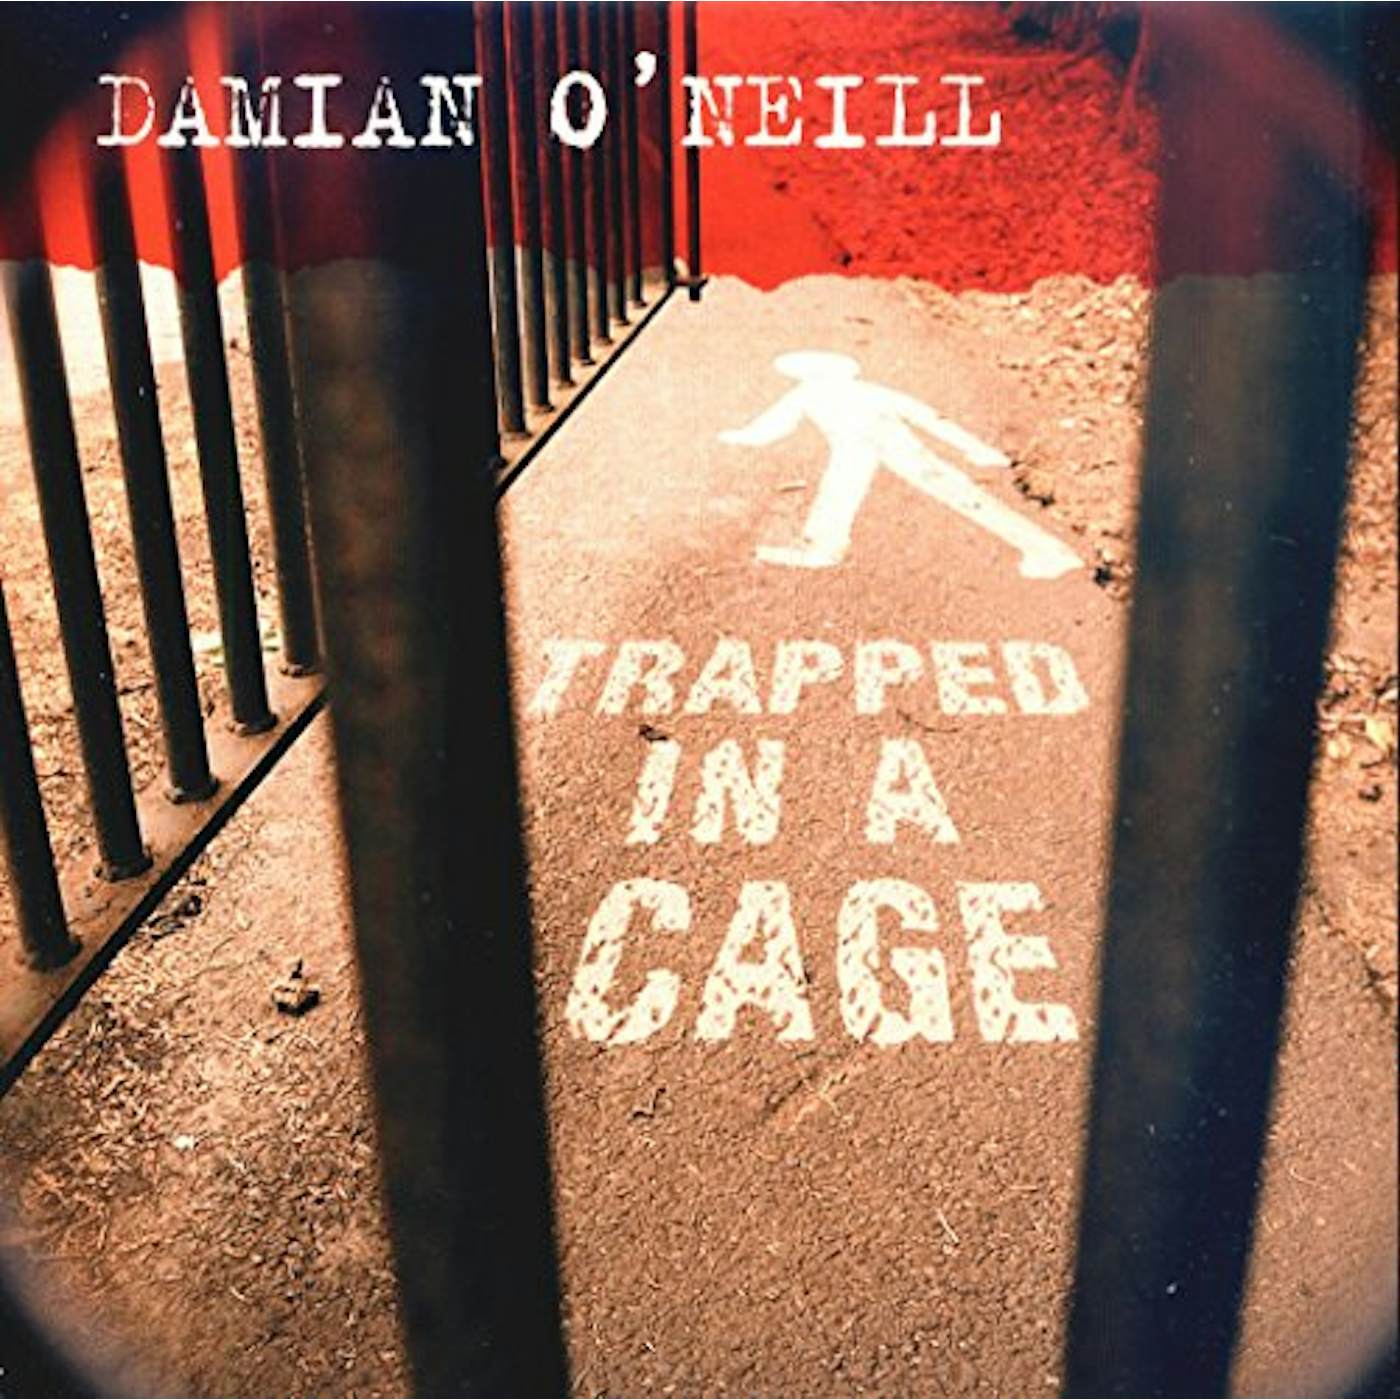 Damien O'Neill TRAPPED IN A CAGE Vinyl Record